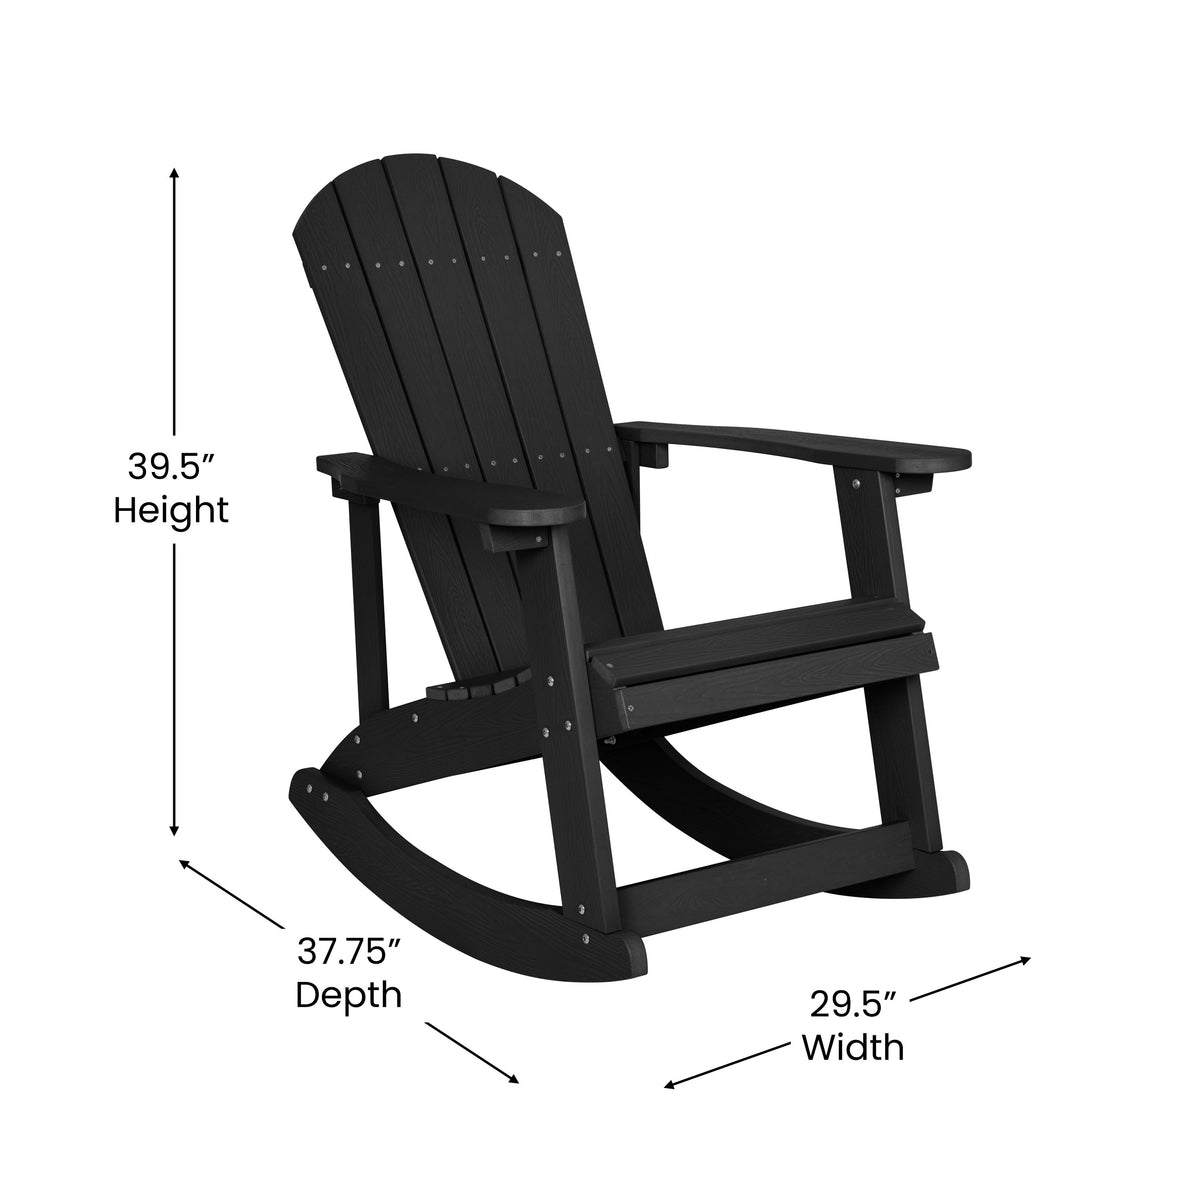 Black |#| Adirondack Style Poly Resin Wood Rocking Chair for Indoor/Outdoor Use - Gray